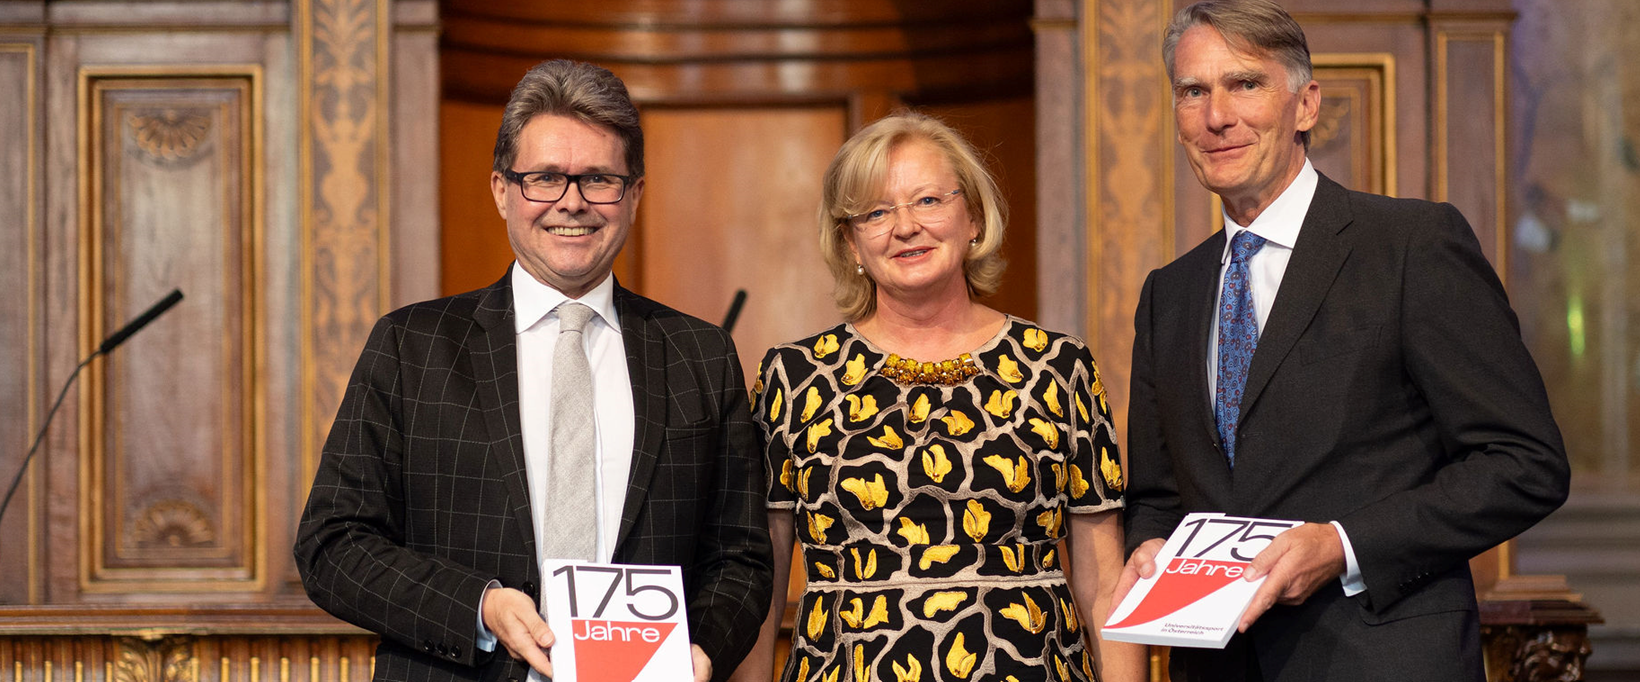 Martin Polaschek, Federal Minister of Education, Science and Research; Hemma Angerer, Acting President Unisport Austria and Sebastian Schütze, Rector of University Vienna, pictured at the 175th anniversary celebration of Unisport Austria ©Unisport Austria
